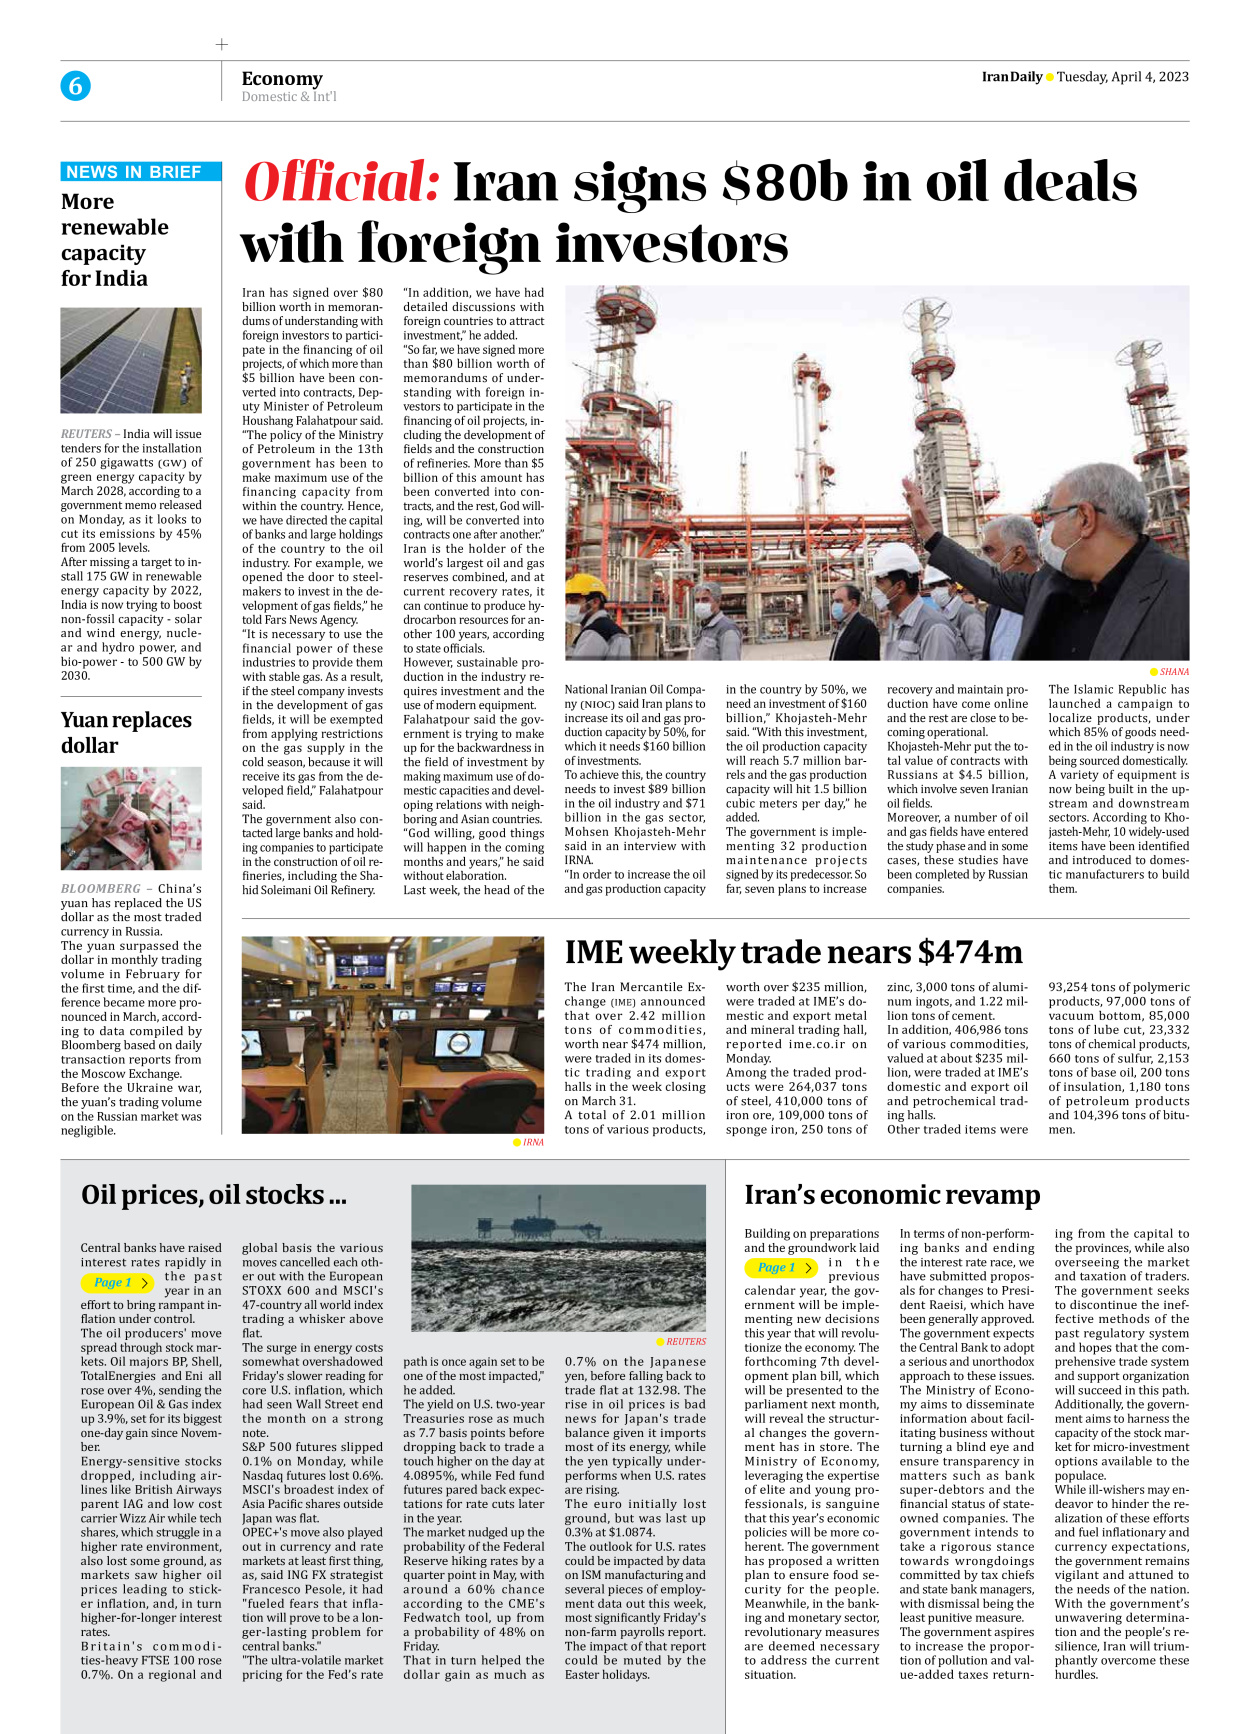 Iran Daily - Number Seven Thousand Two Hundred and Sixty One - 04 April 2023 - Page 6